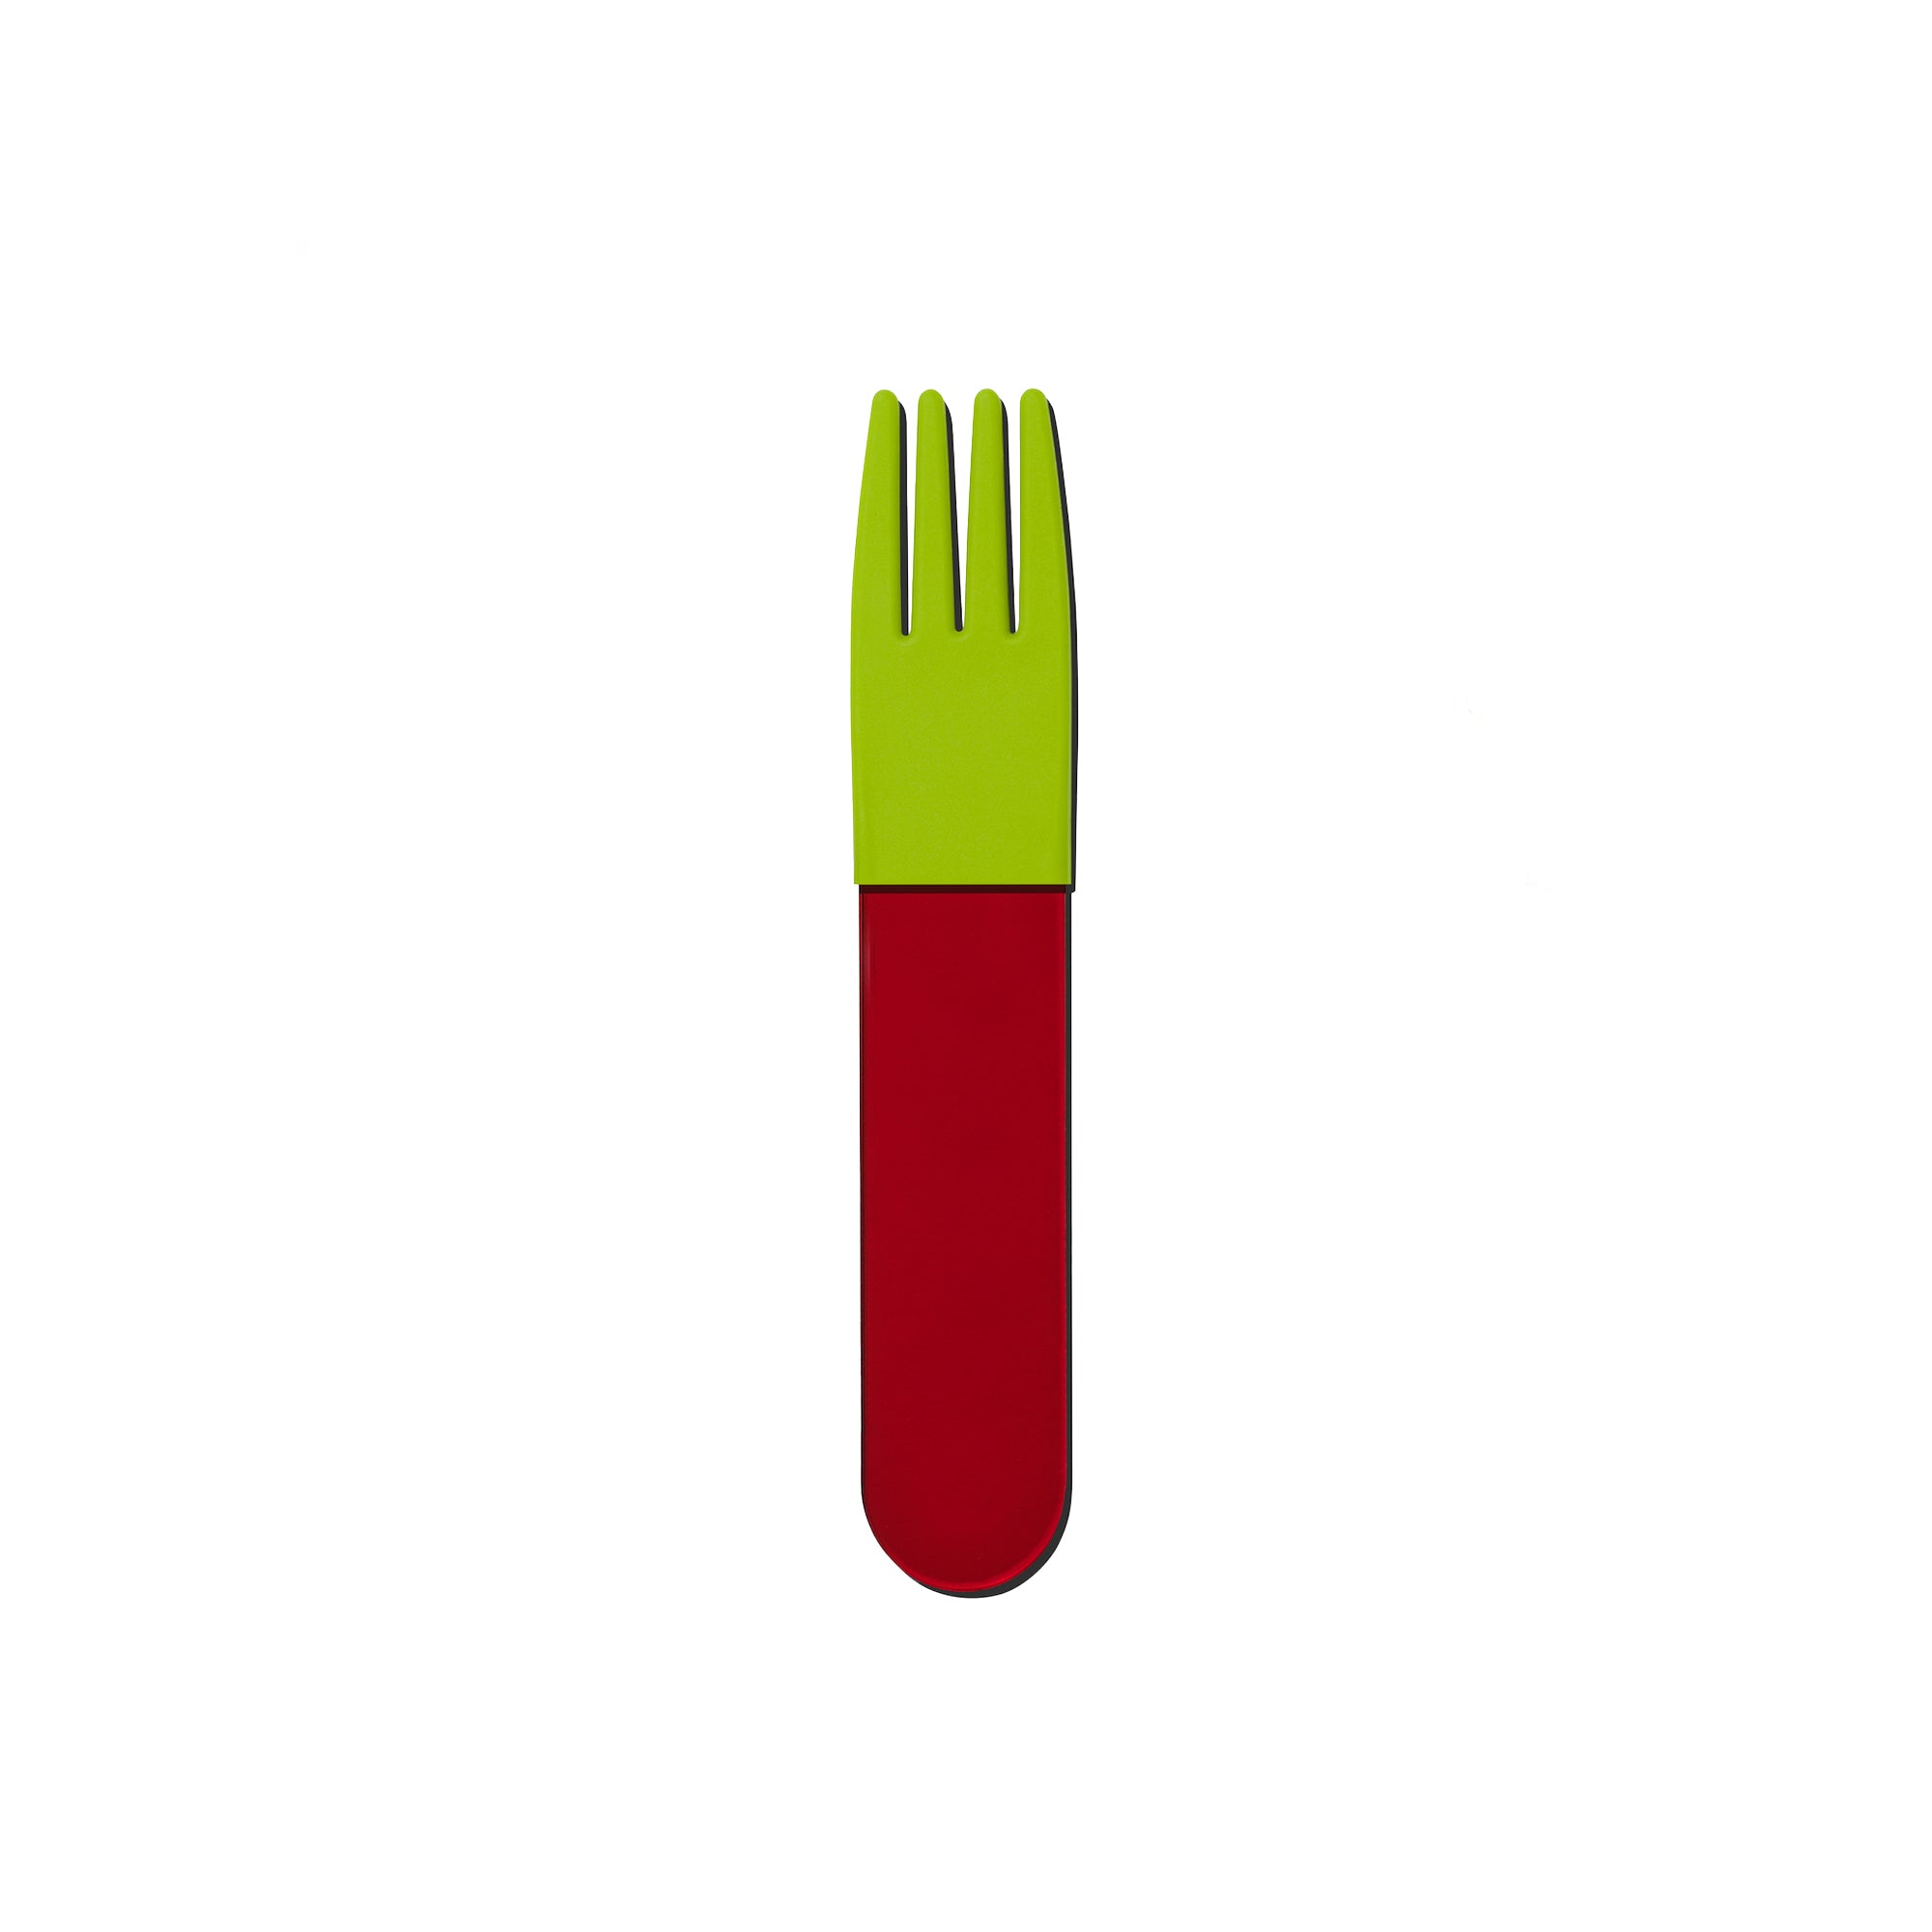 Just A Fork